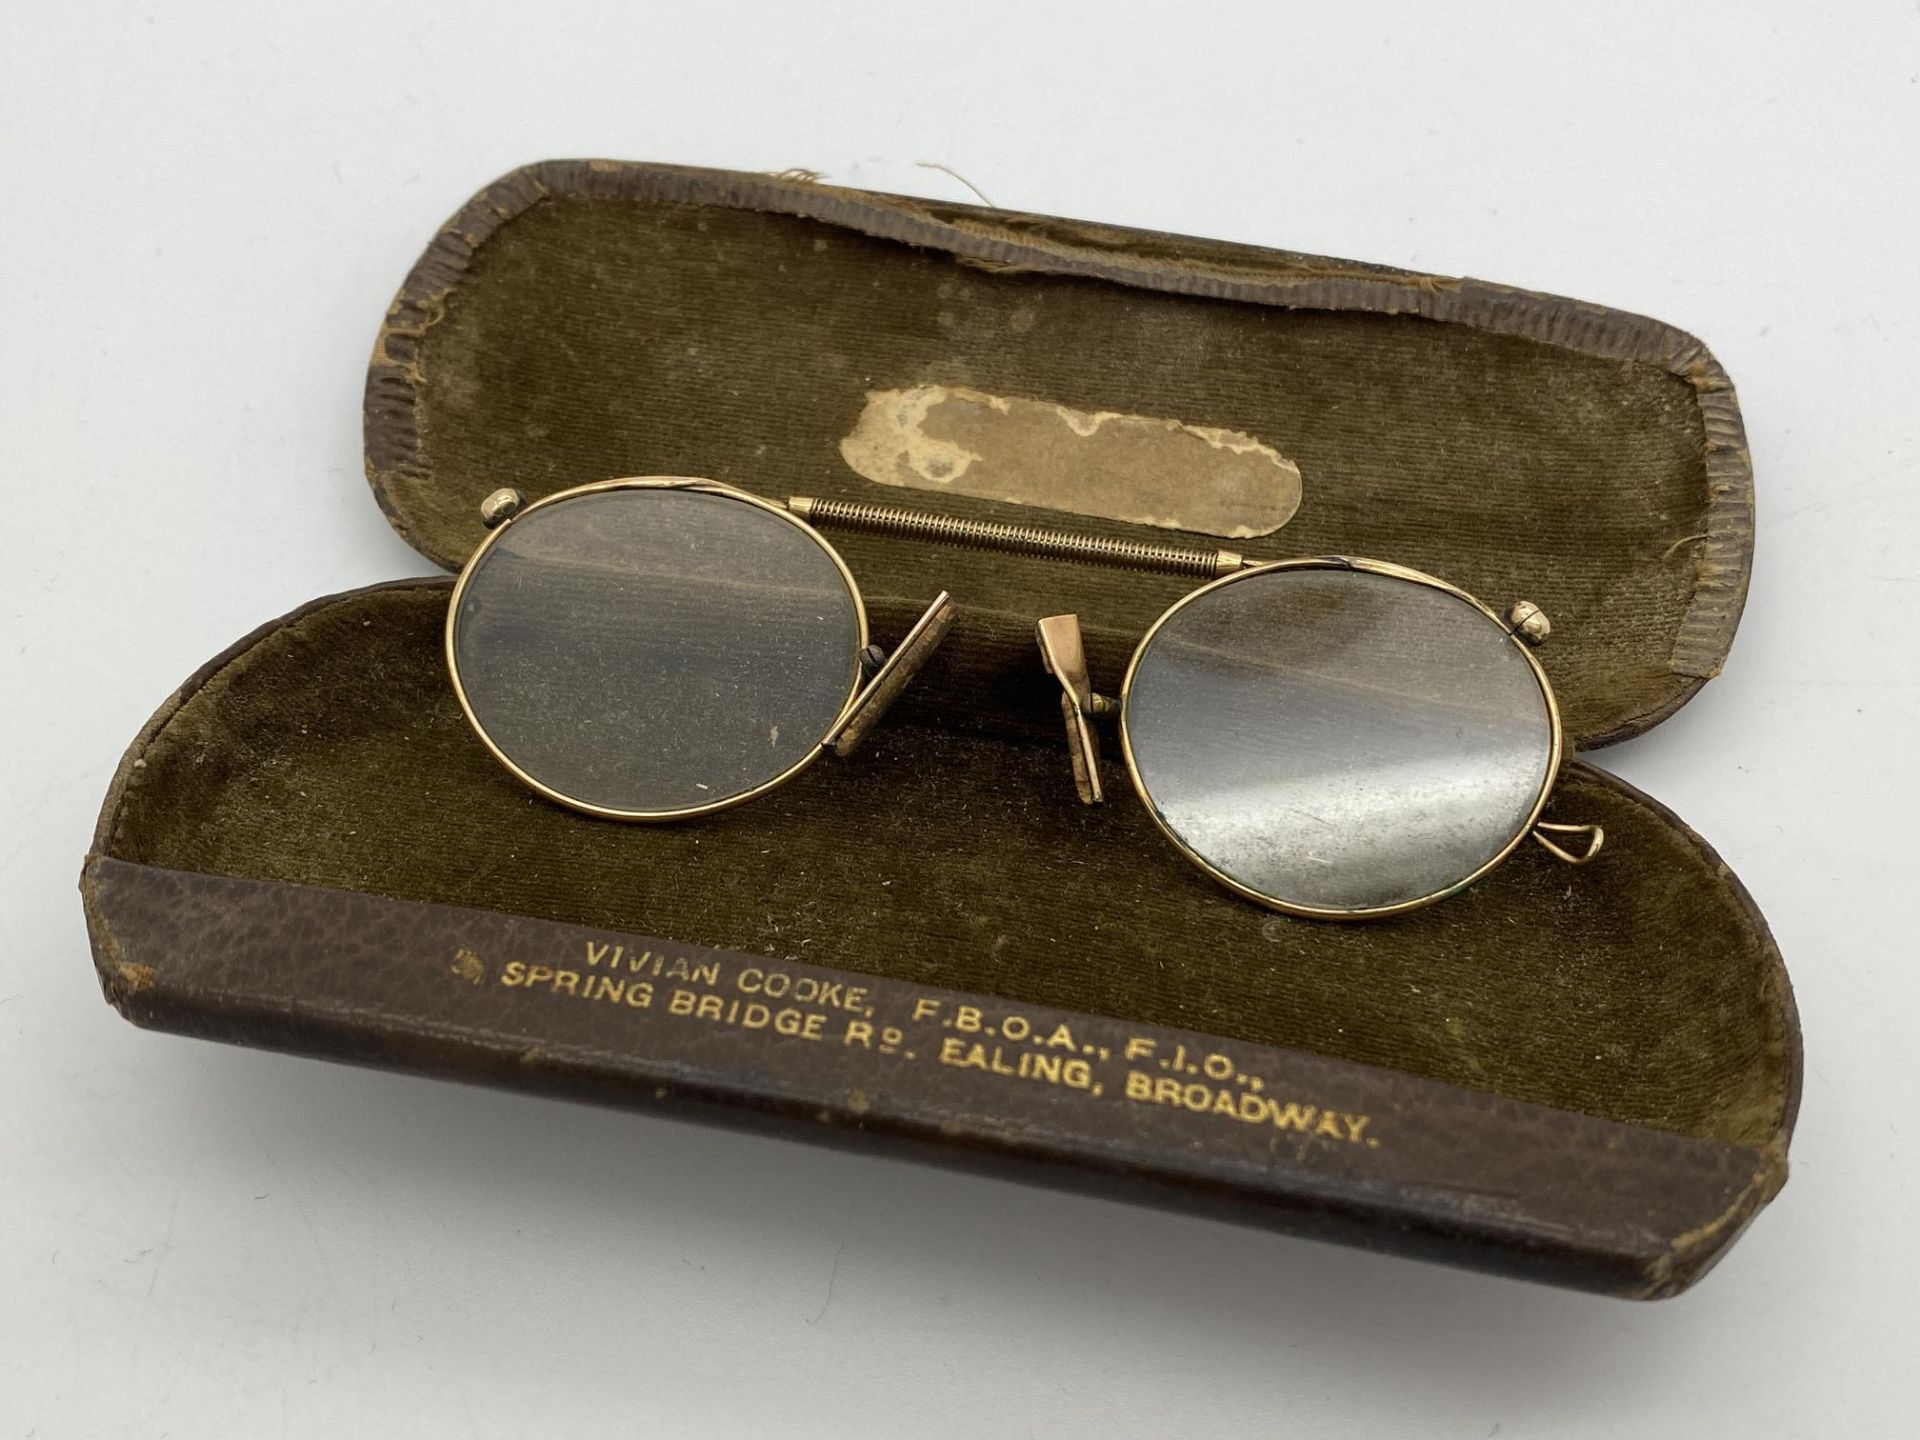 ANTIQUE 10CT GOLD SPECTACLES (GLASSES) WITH METAL CASE - Image 4 of 7